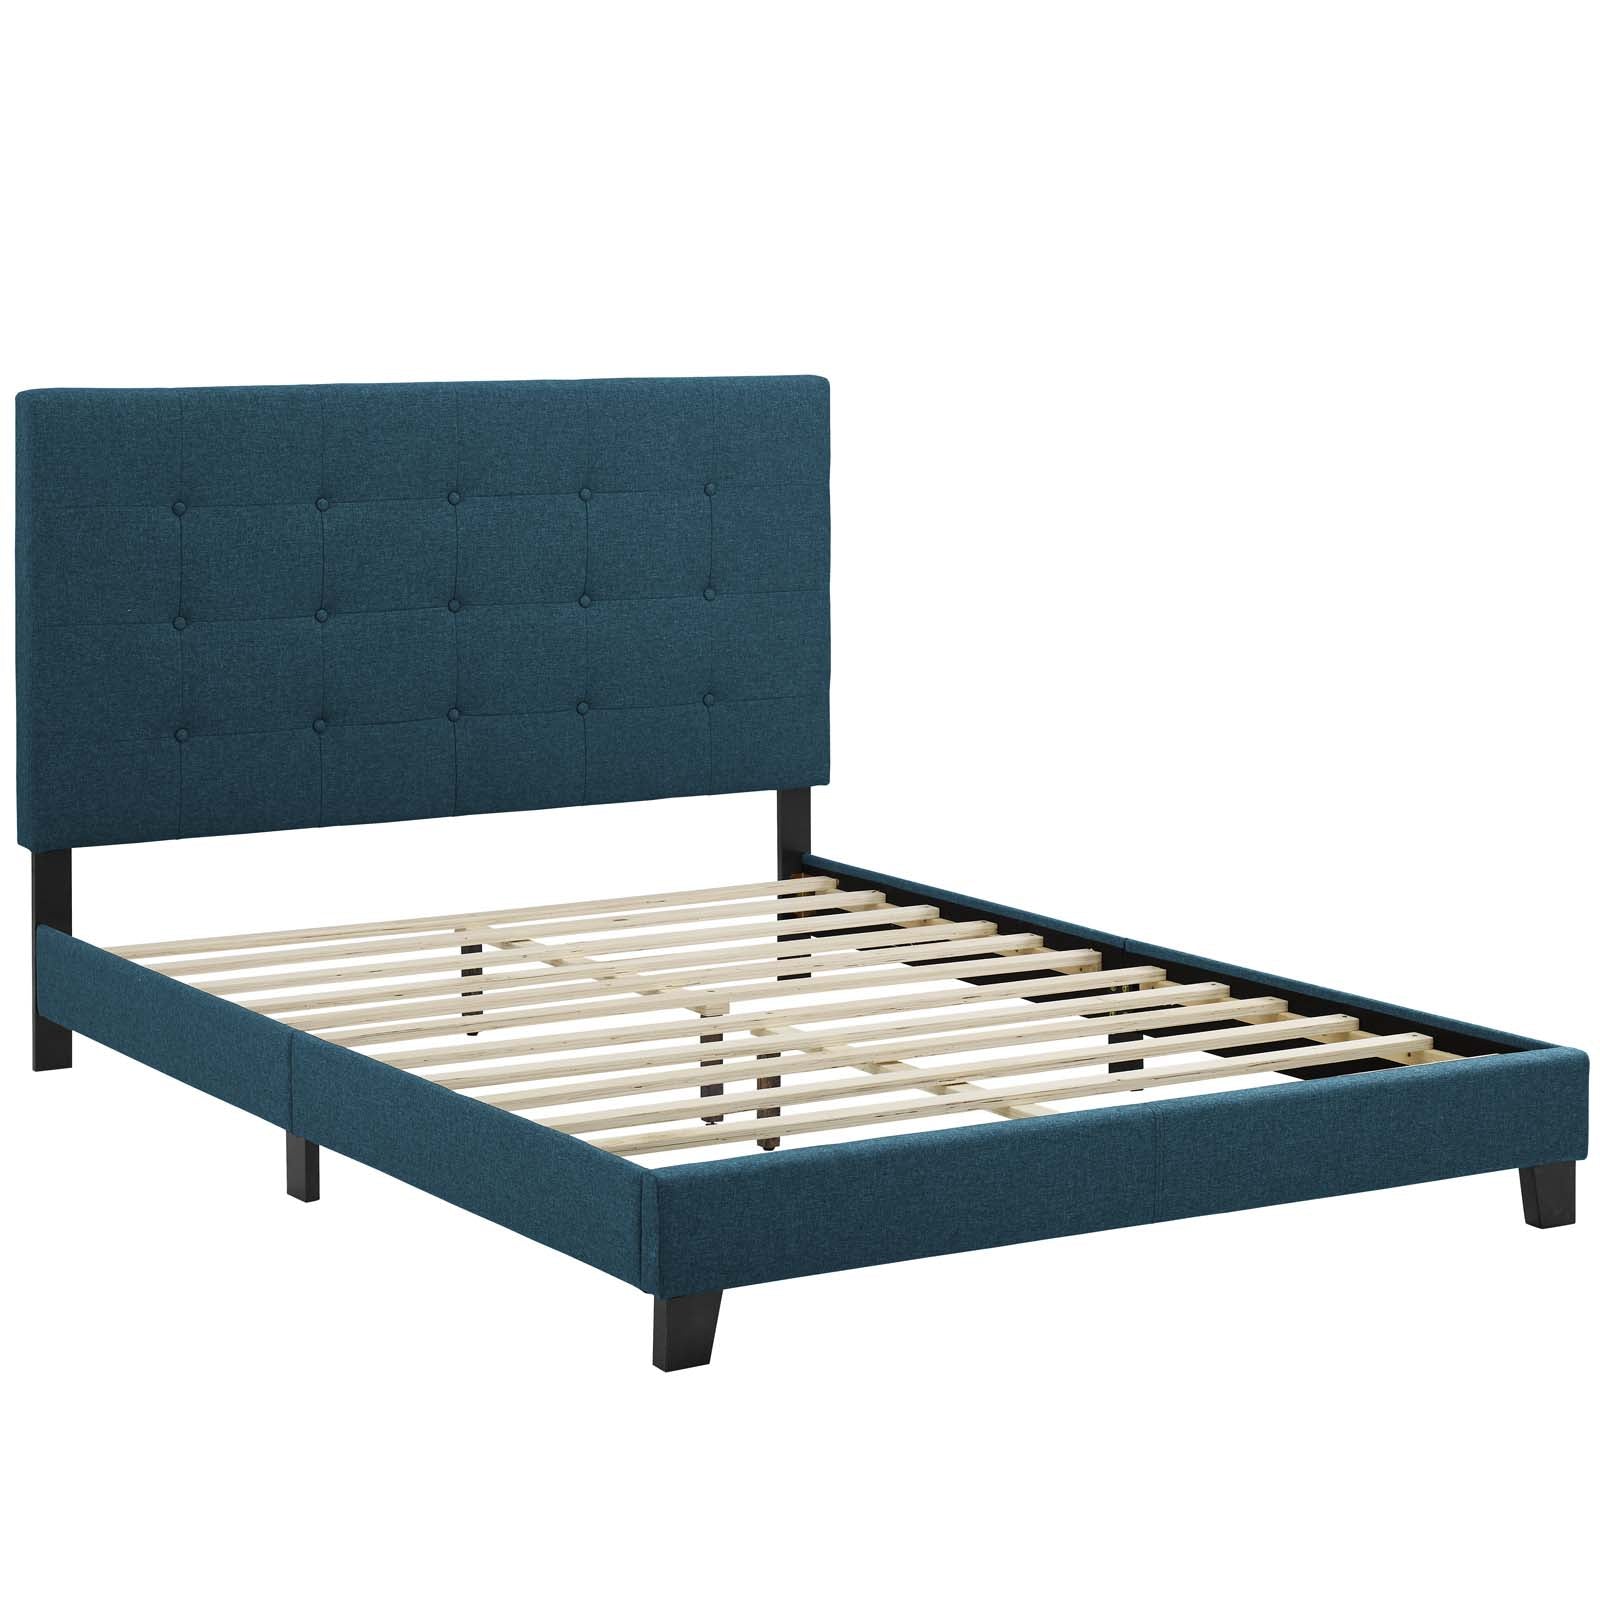 Modway Beds - Melanie Queen Tufted Button Upholstered Fabric Platform Bed Azure